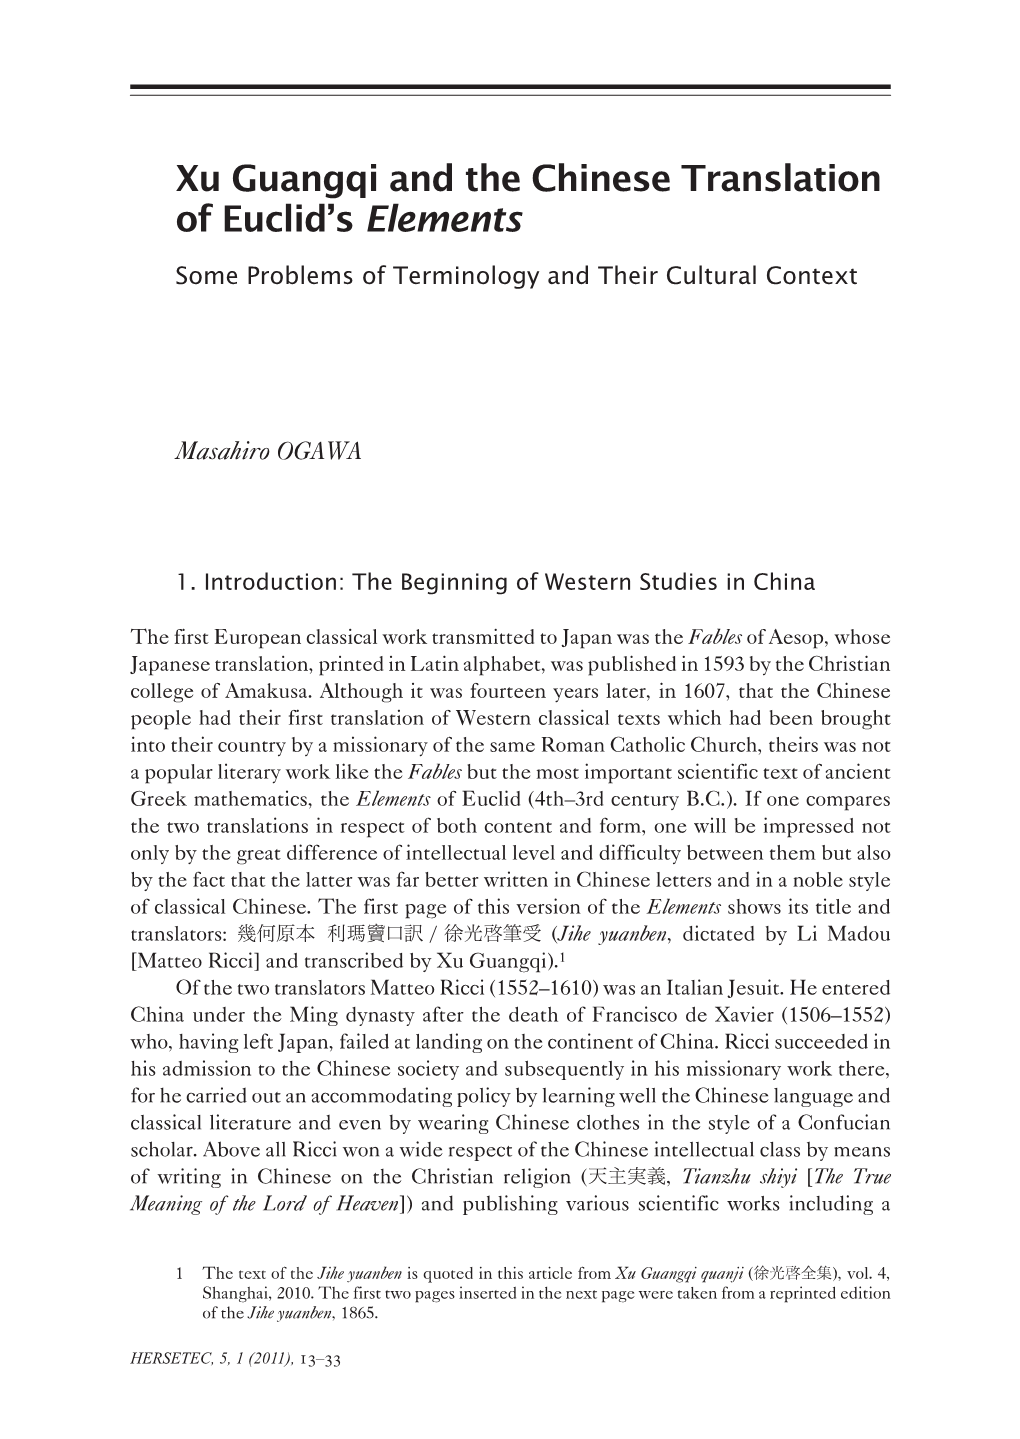 Xu Guangqi and the Chinese Translation of Euclid's Elements